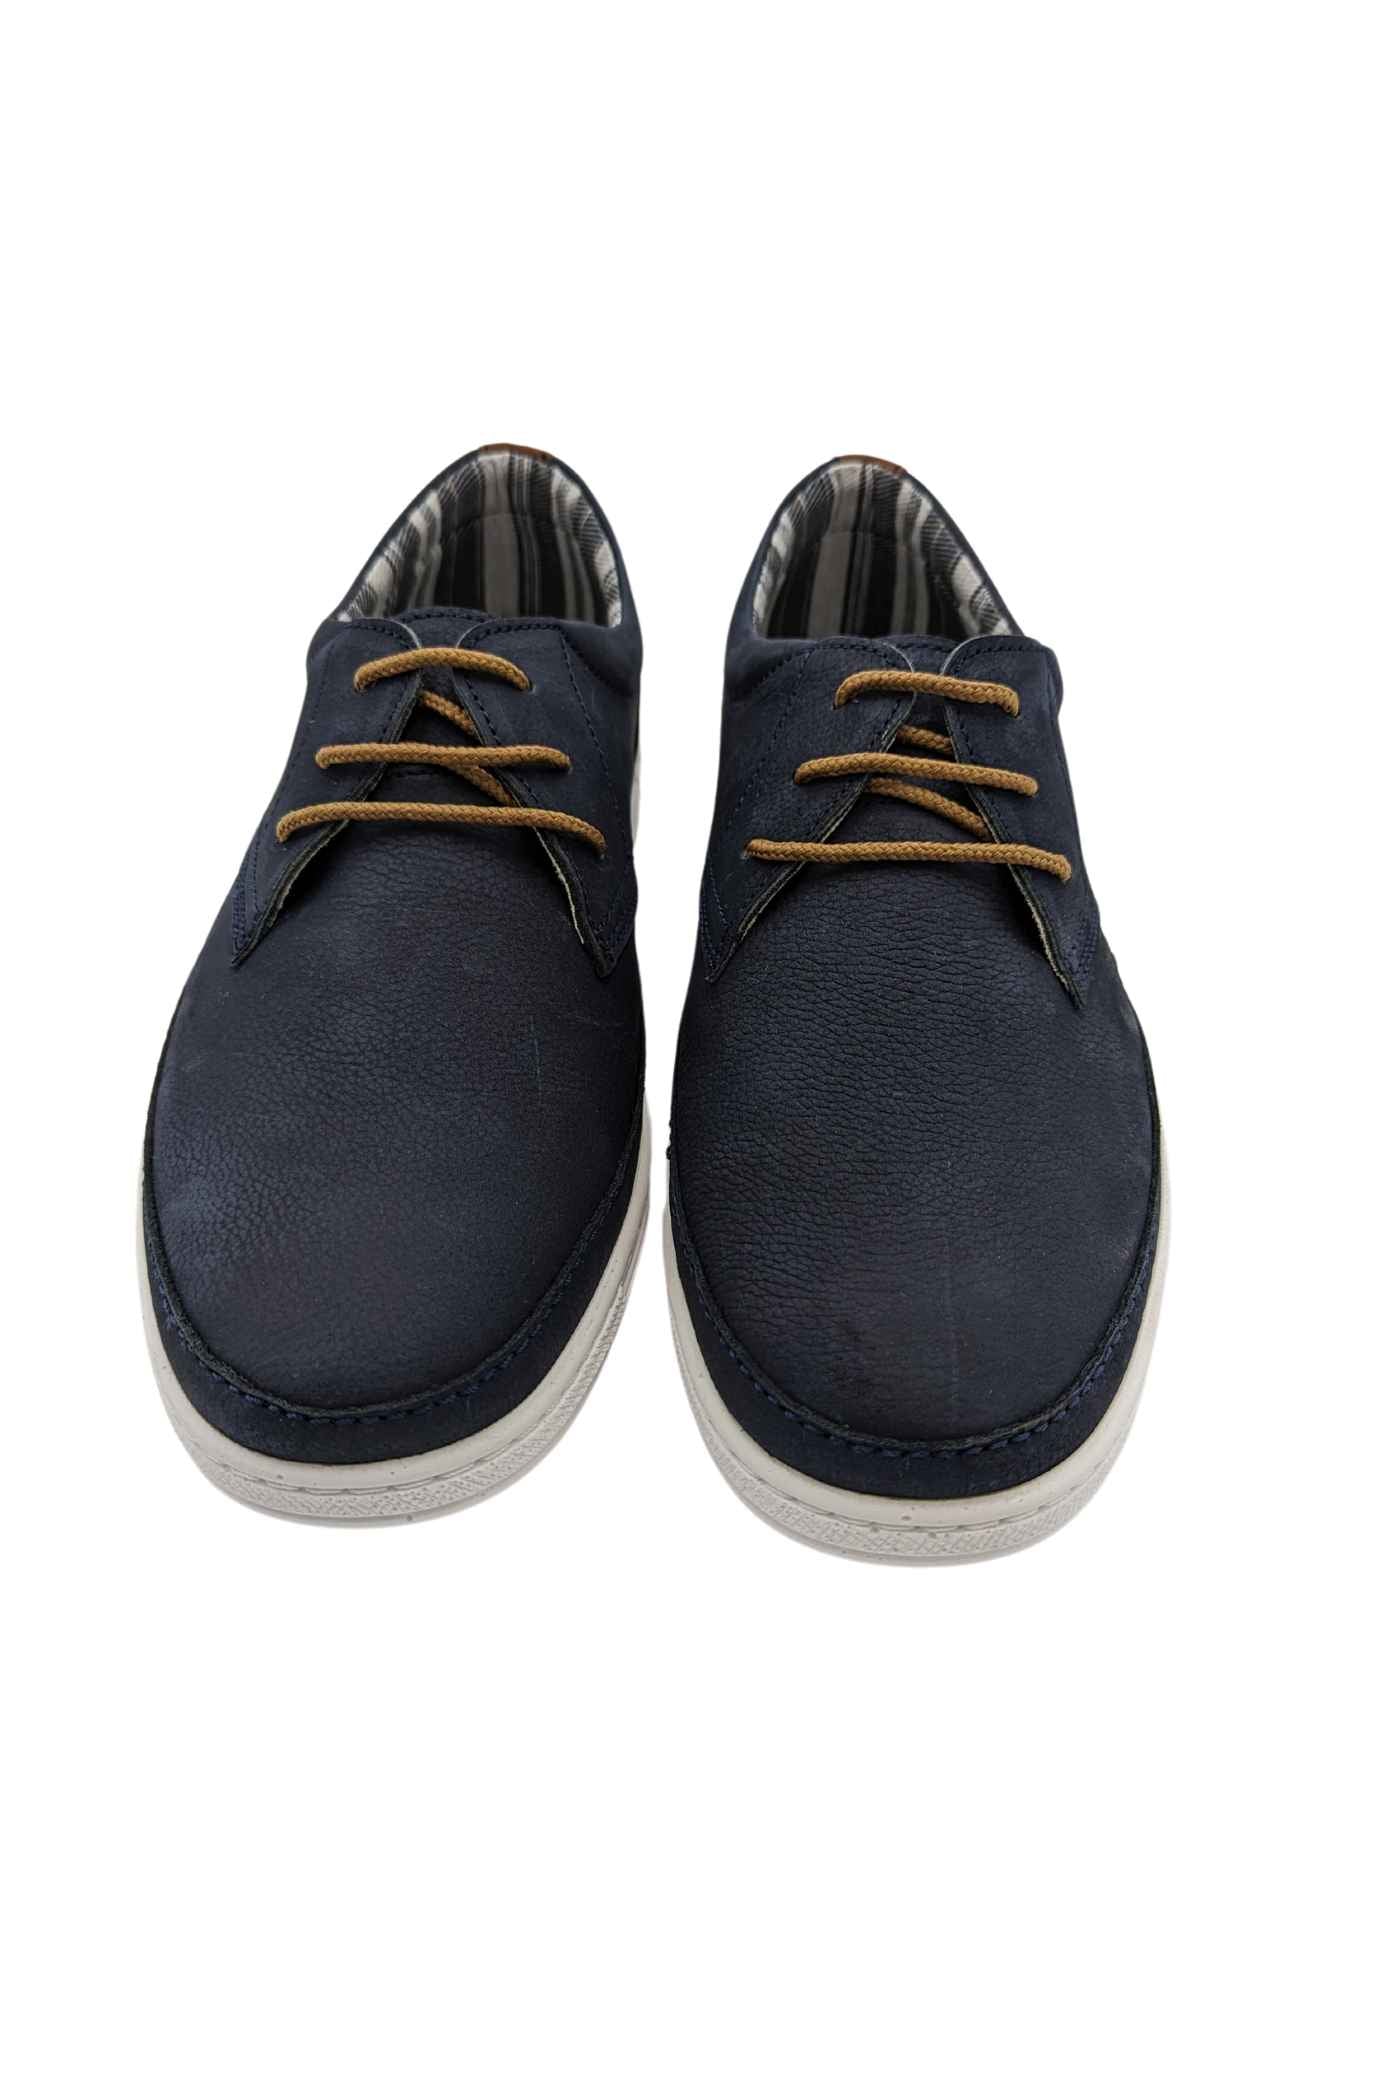 Sully Navy Shoe-Front view